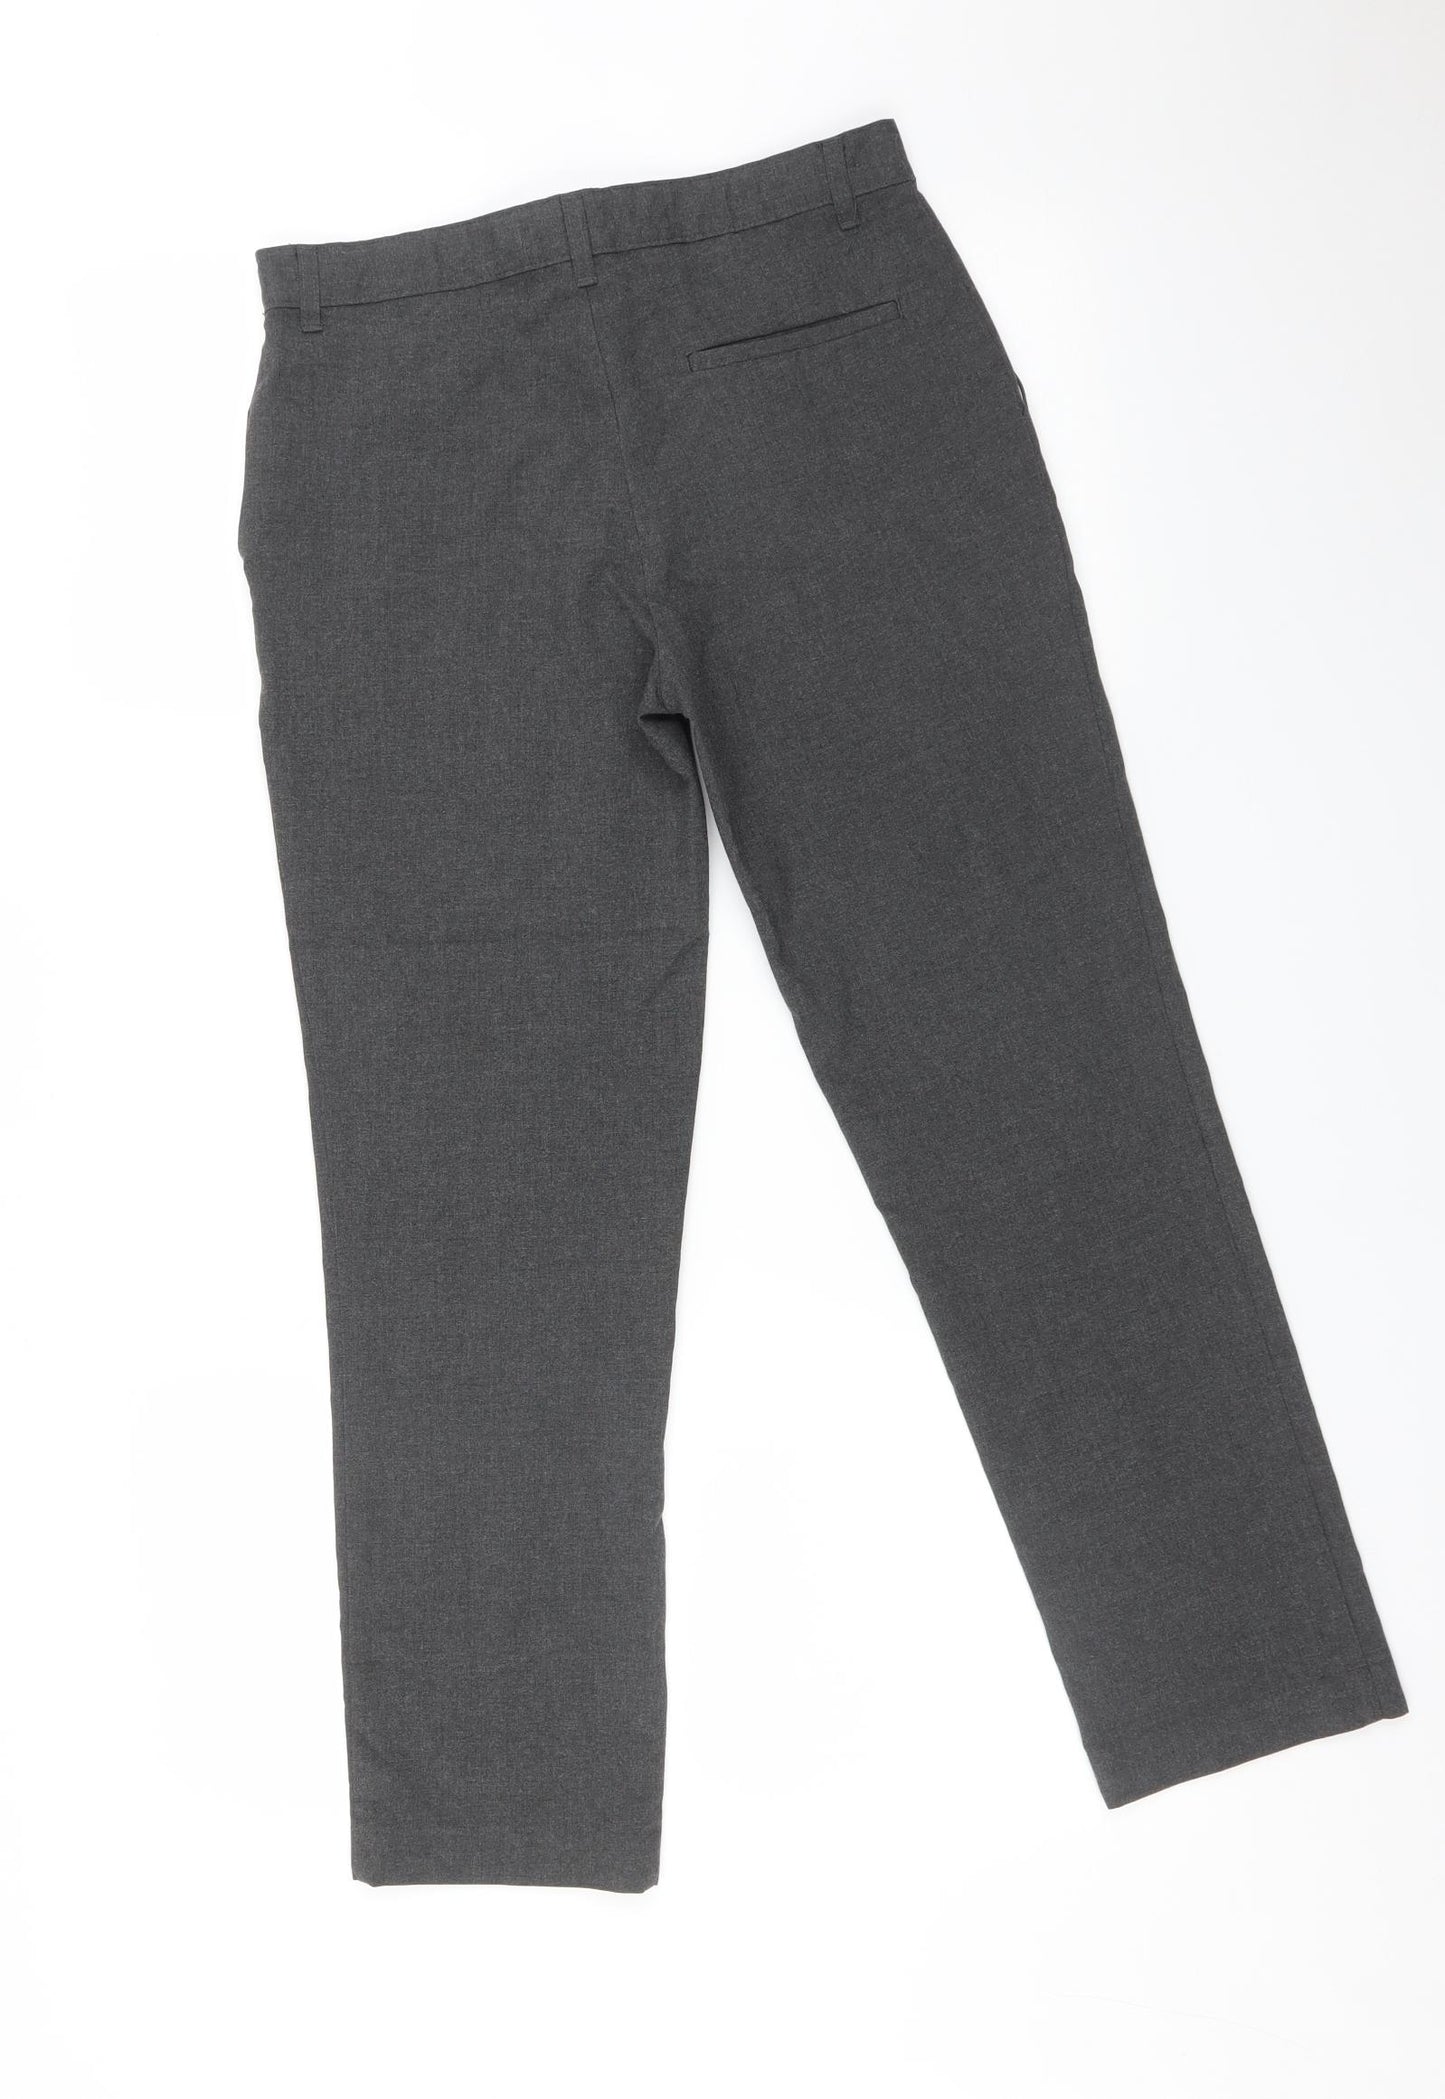 Marks and Spencer Boys Grey    Trousers Size 11-12 Years